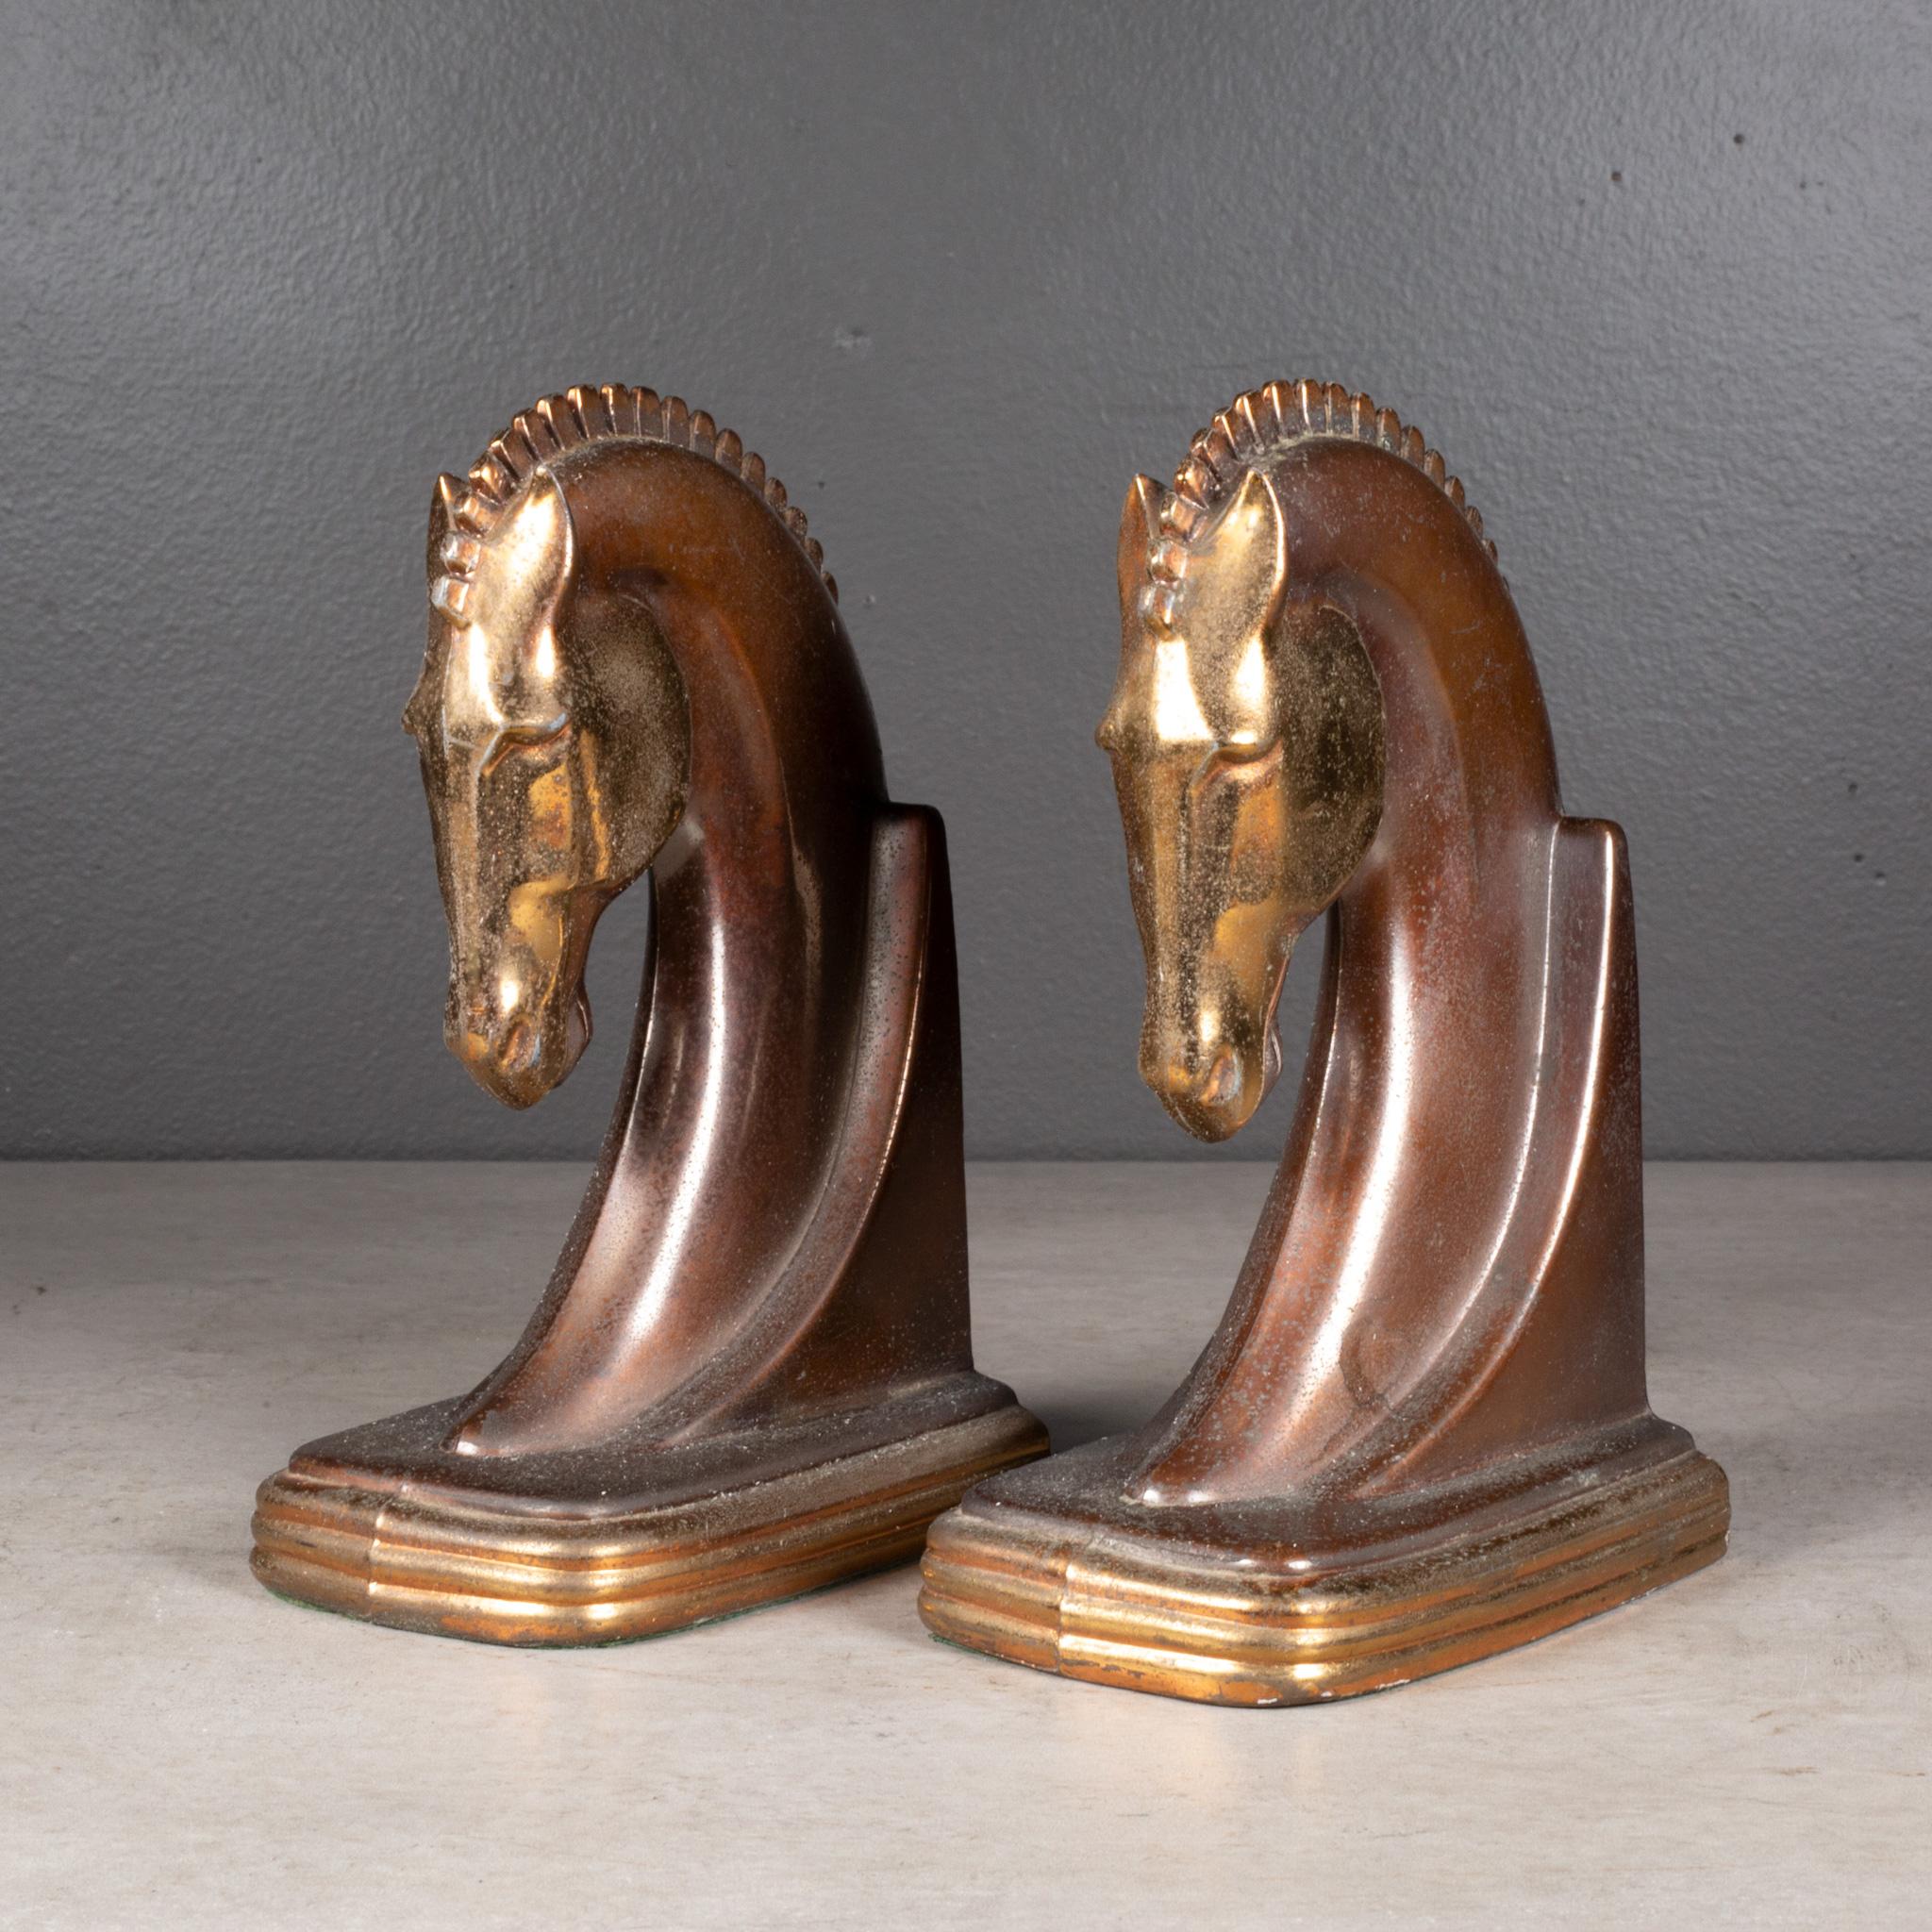 ABOUT

An original pair of Art Deco Trojan horse bookends manufactured by Dodge Trophy Inc. Los Angeles California USA. Both pieces have retained their original bronze finish and are in good condition with appropriate patina for their age. Original